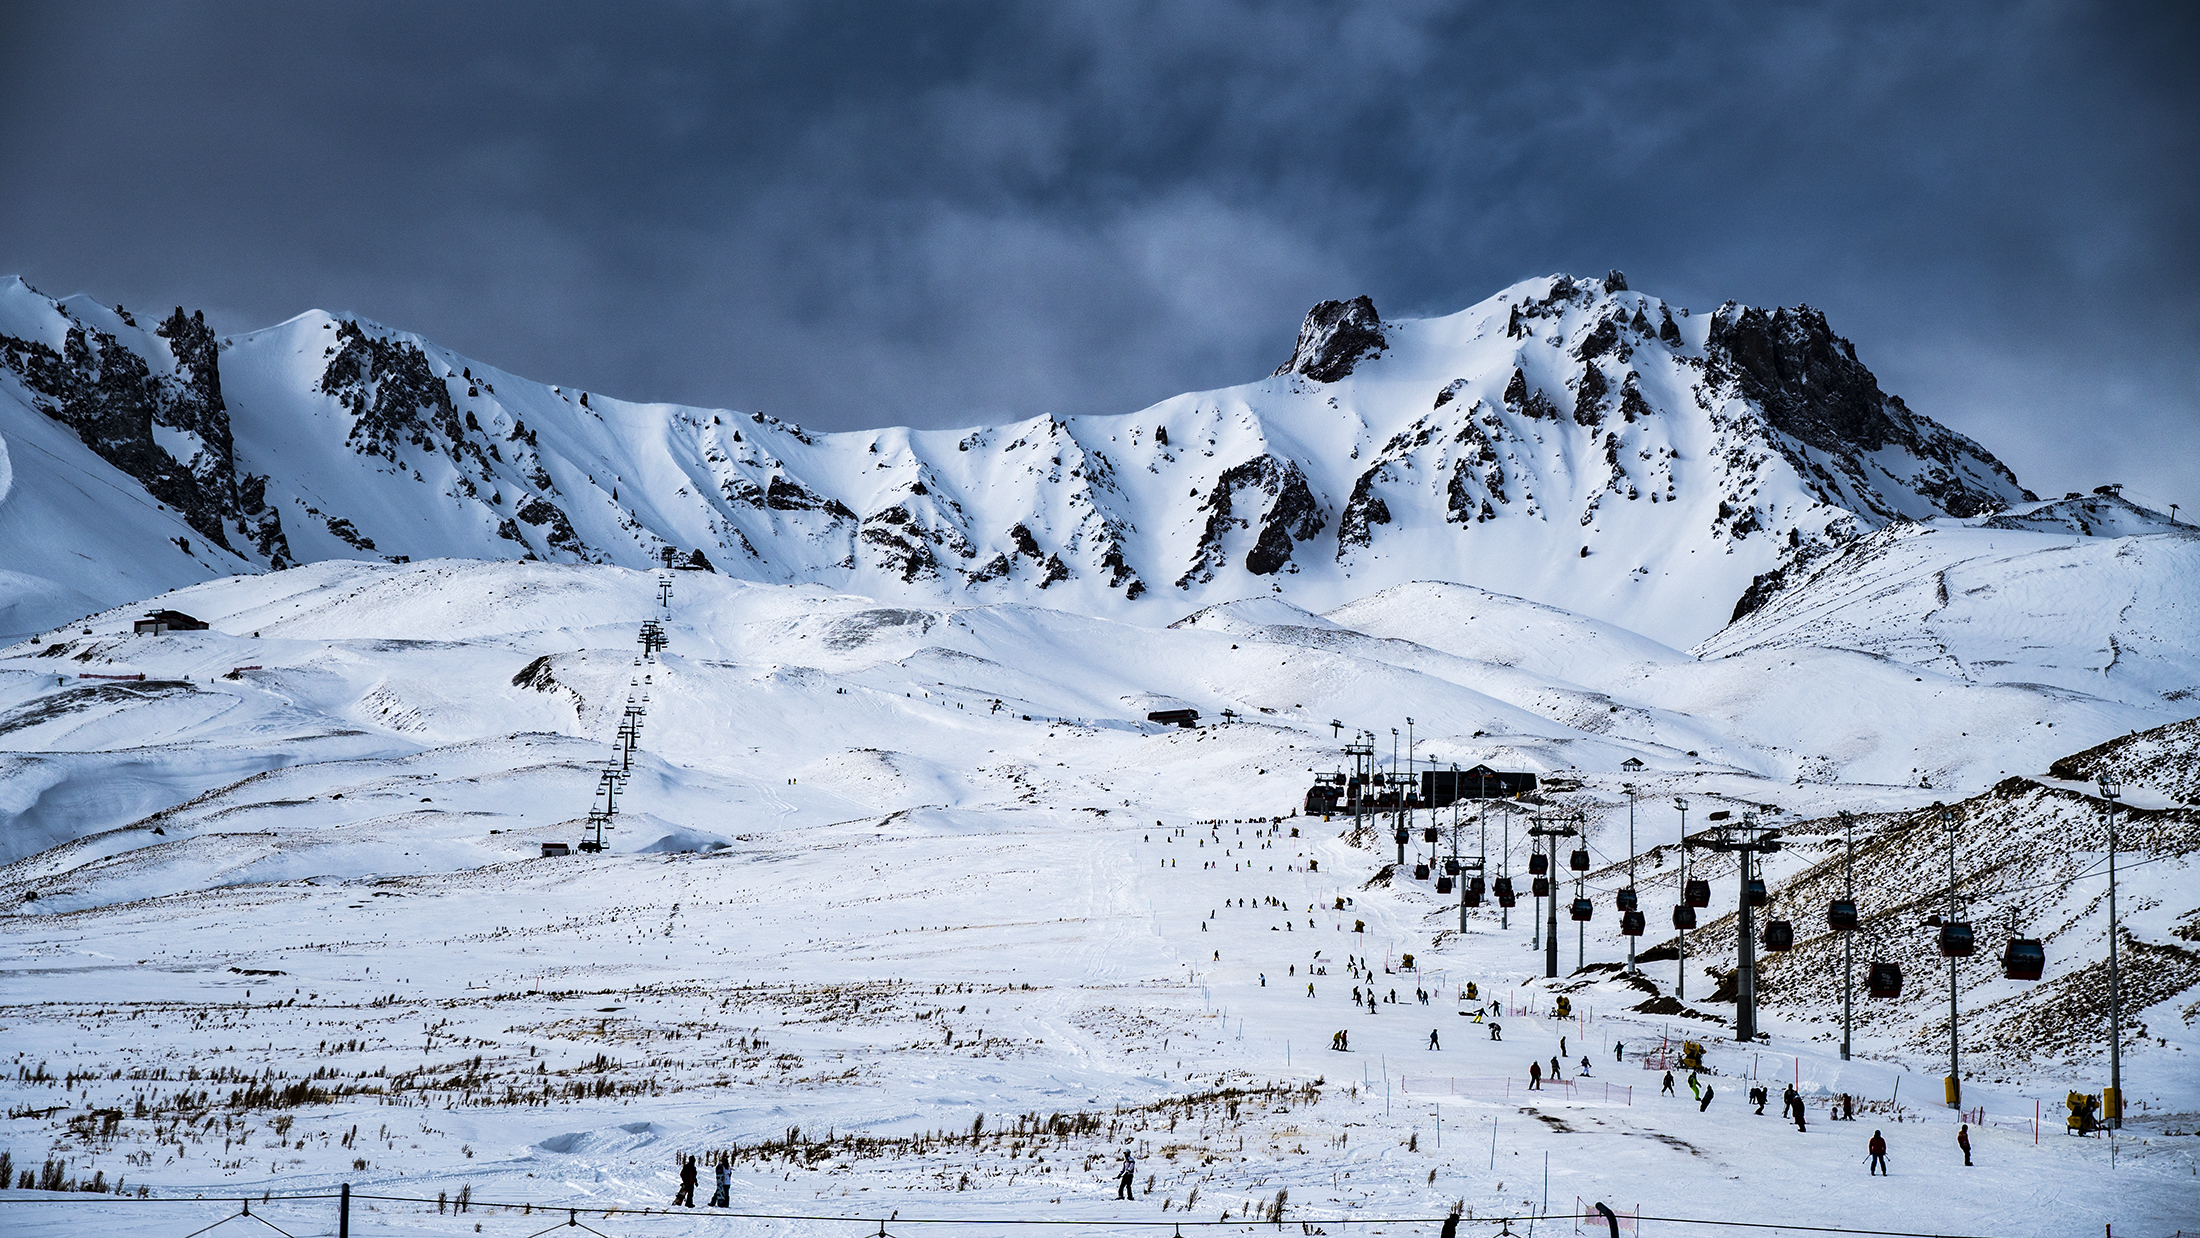 Enjoying Skiing on Mount Erciyes: A New Experience